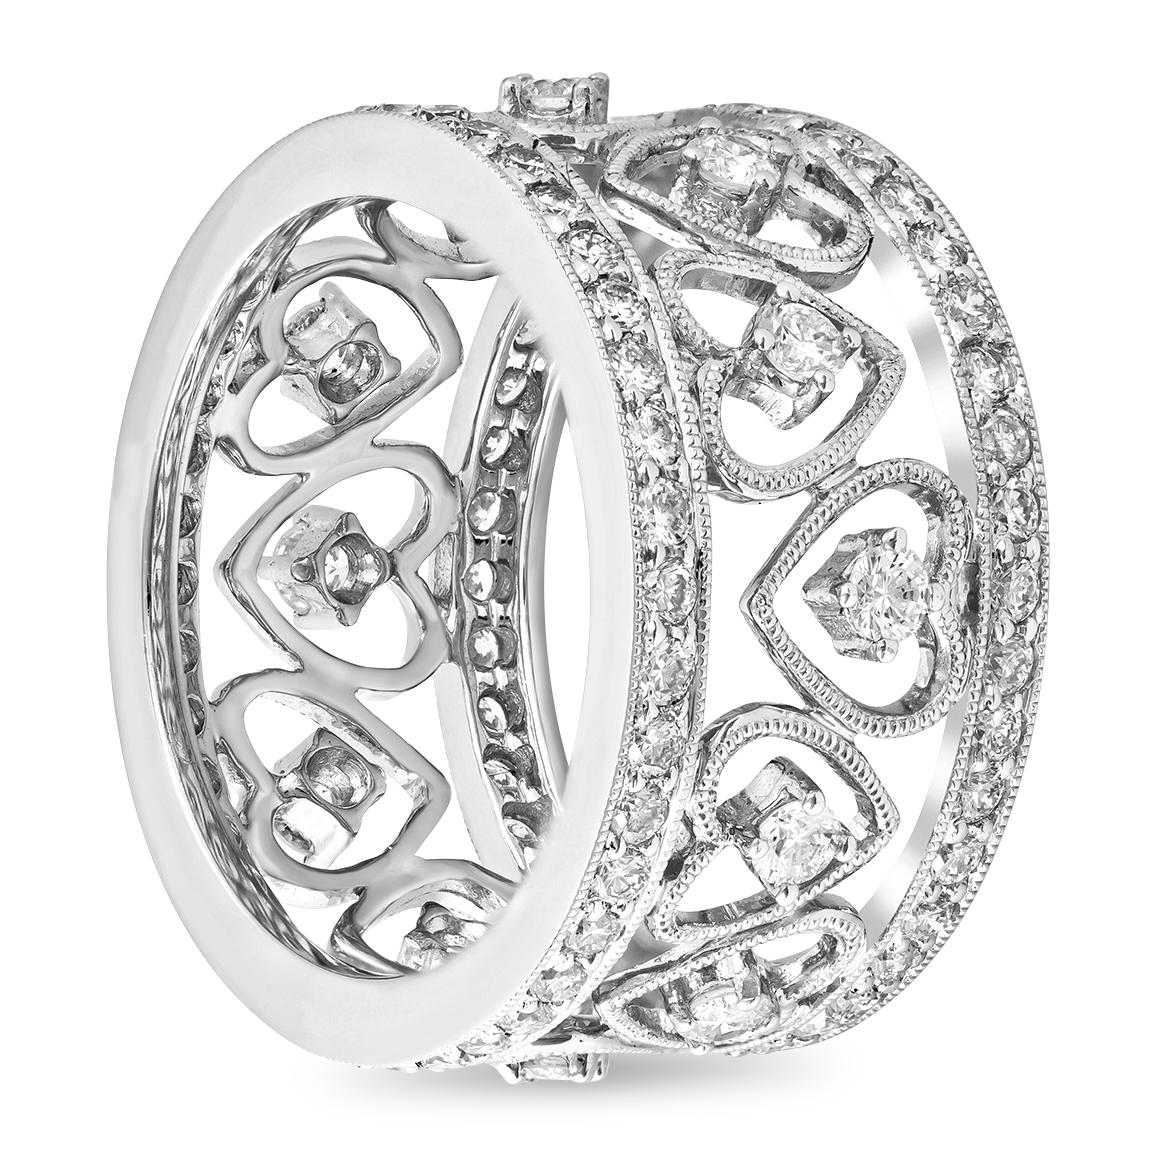 An intricately-designed and antique style eternity wedding band ring set with 1.61 carats total of brilliant round sparkling diamonds. The ring features open-hearts that elegantly encircle the 18K white gold composition, finished with milgrain edges